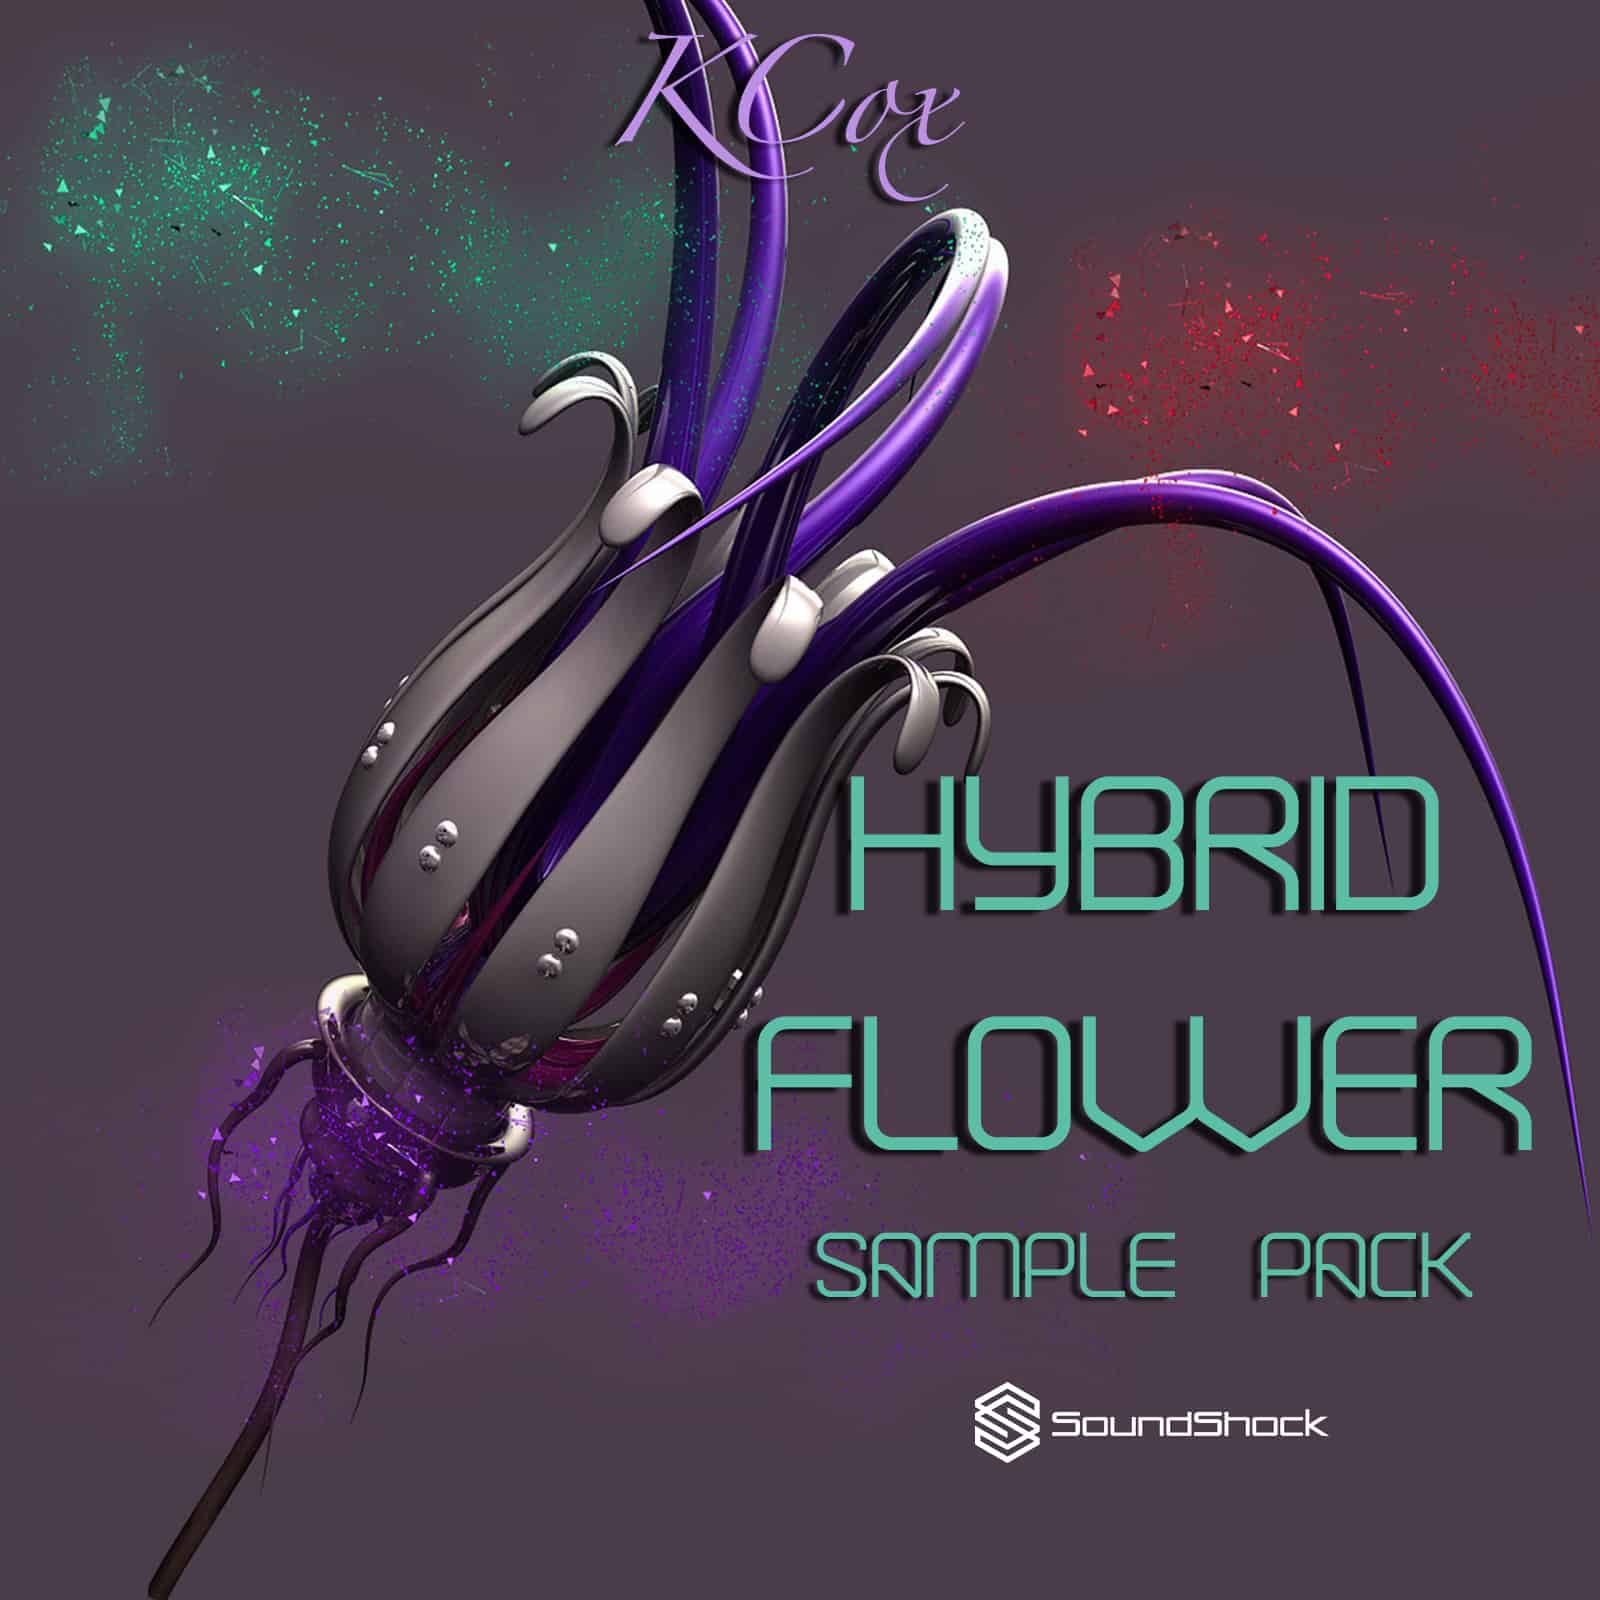 Hybrid flower sample pack contains a variety of vibrant hybrid flowers.